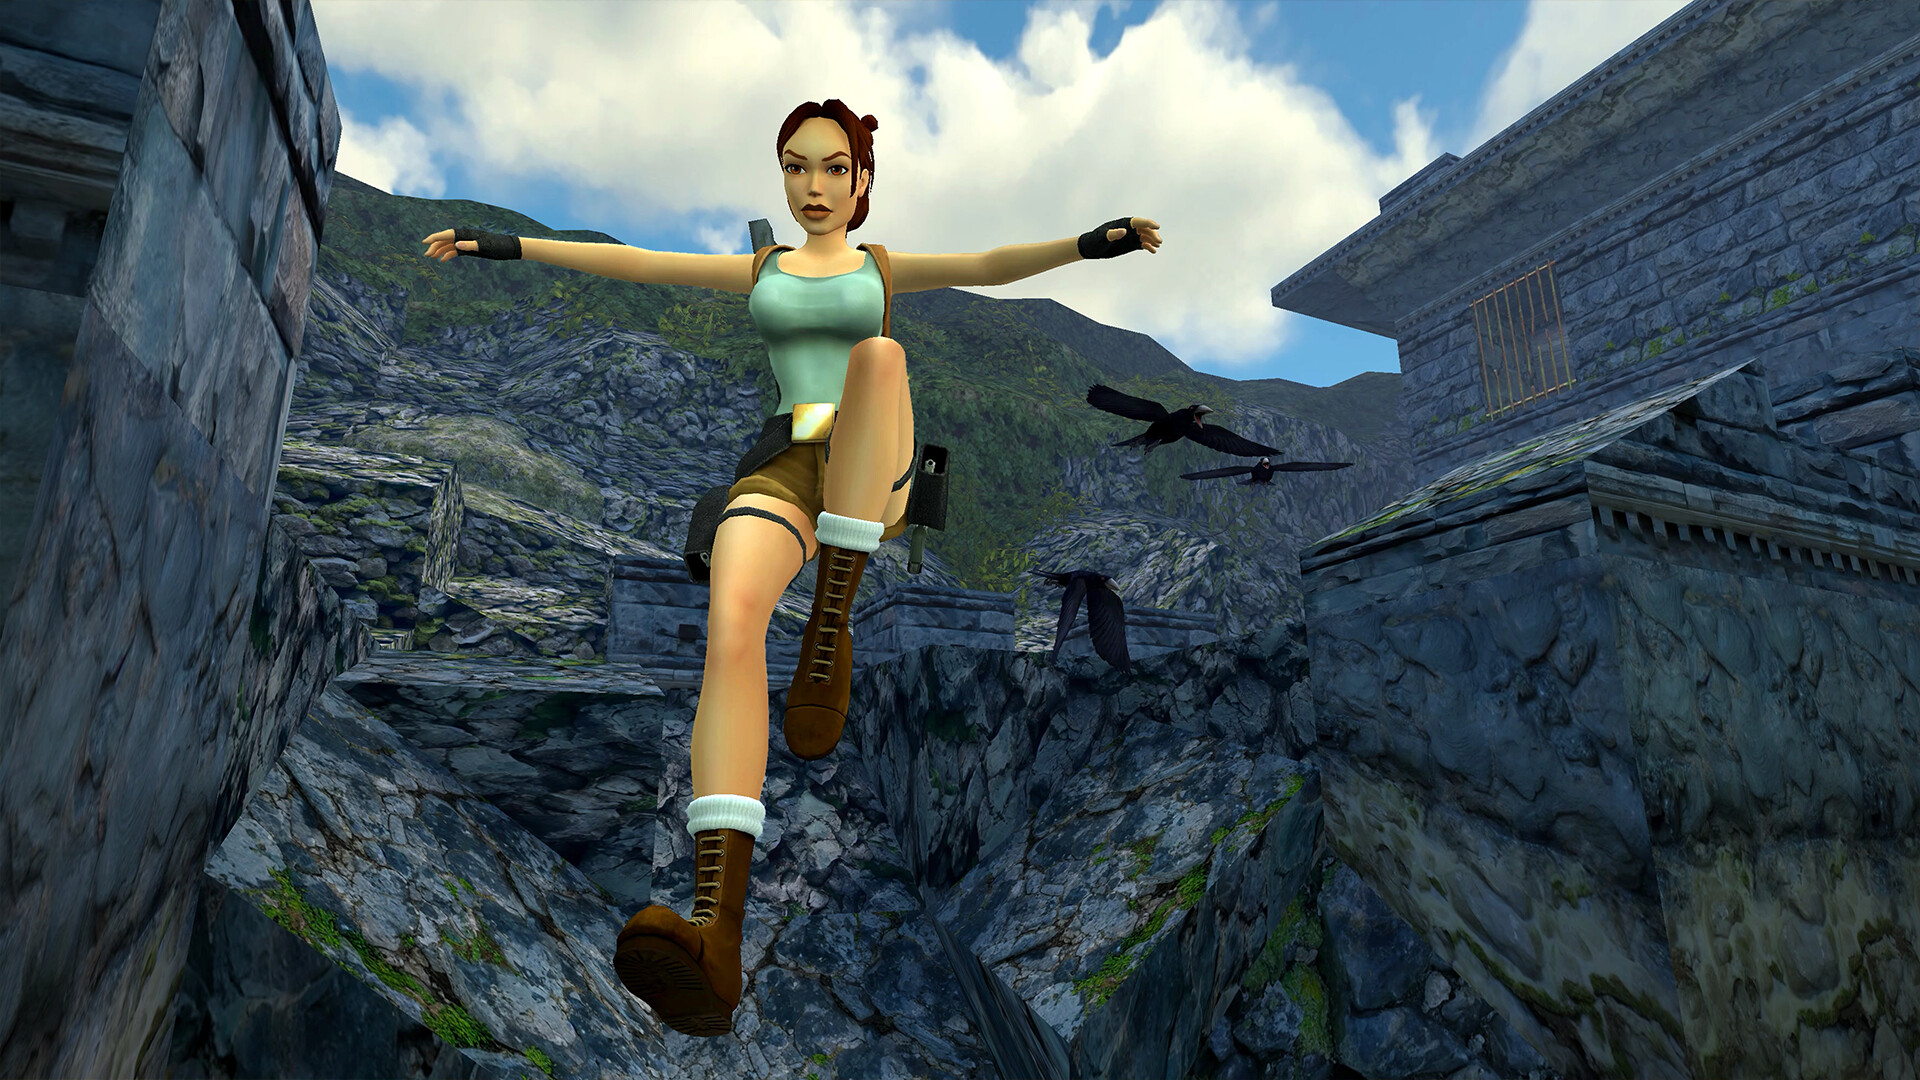 PlayStation Blog] Tomb Raider I-III Remastered – PS4, PS5 features  detailed, new key art Revealed : r/TombRaider